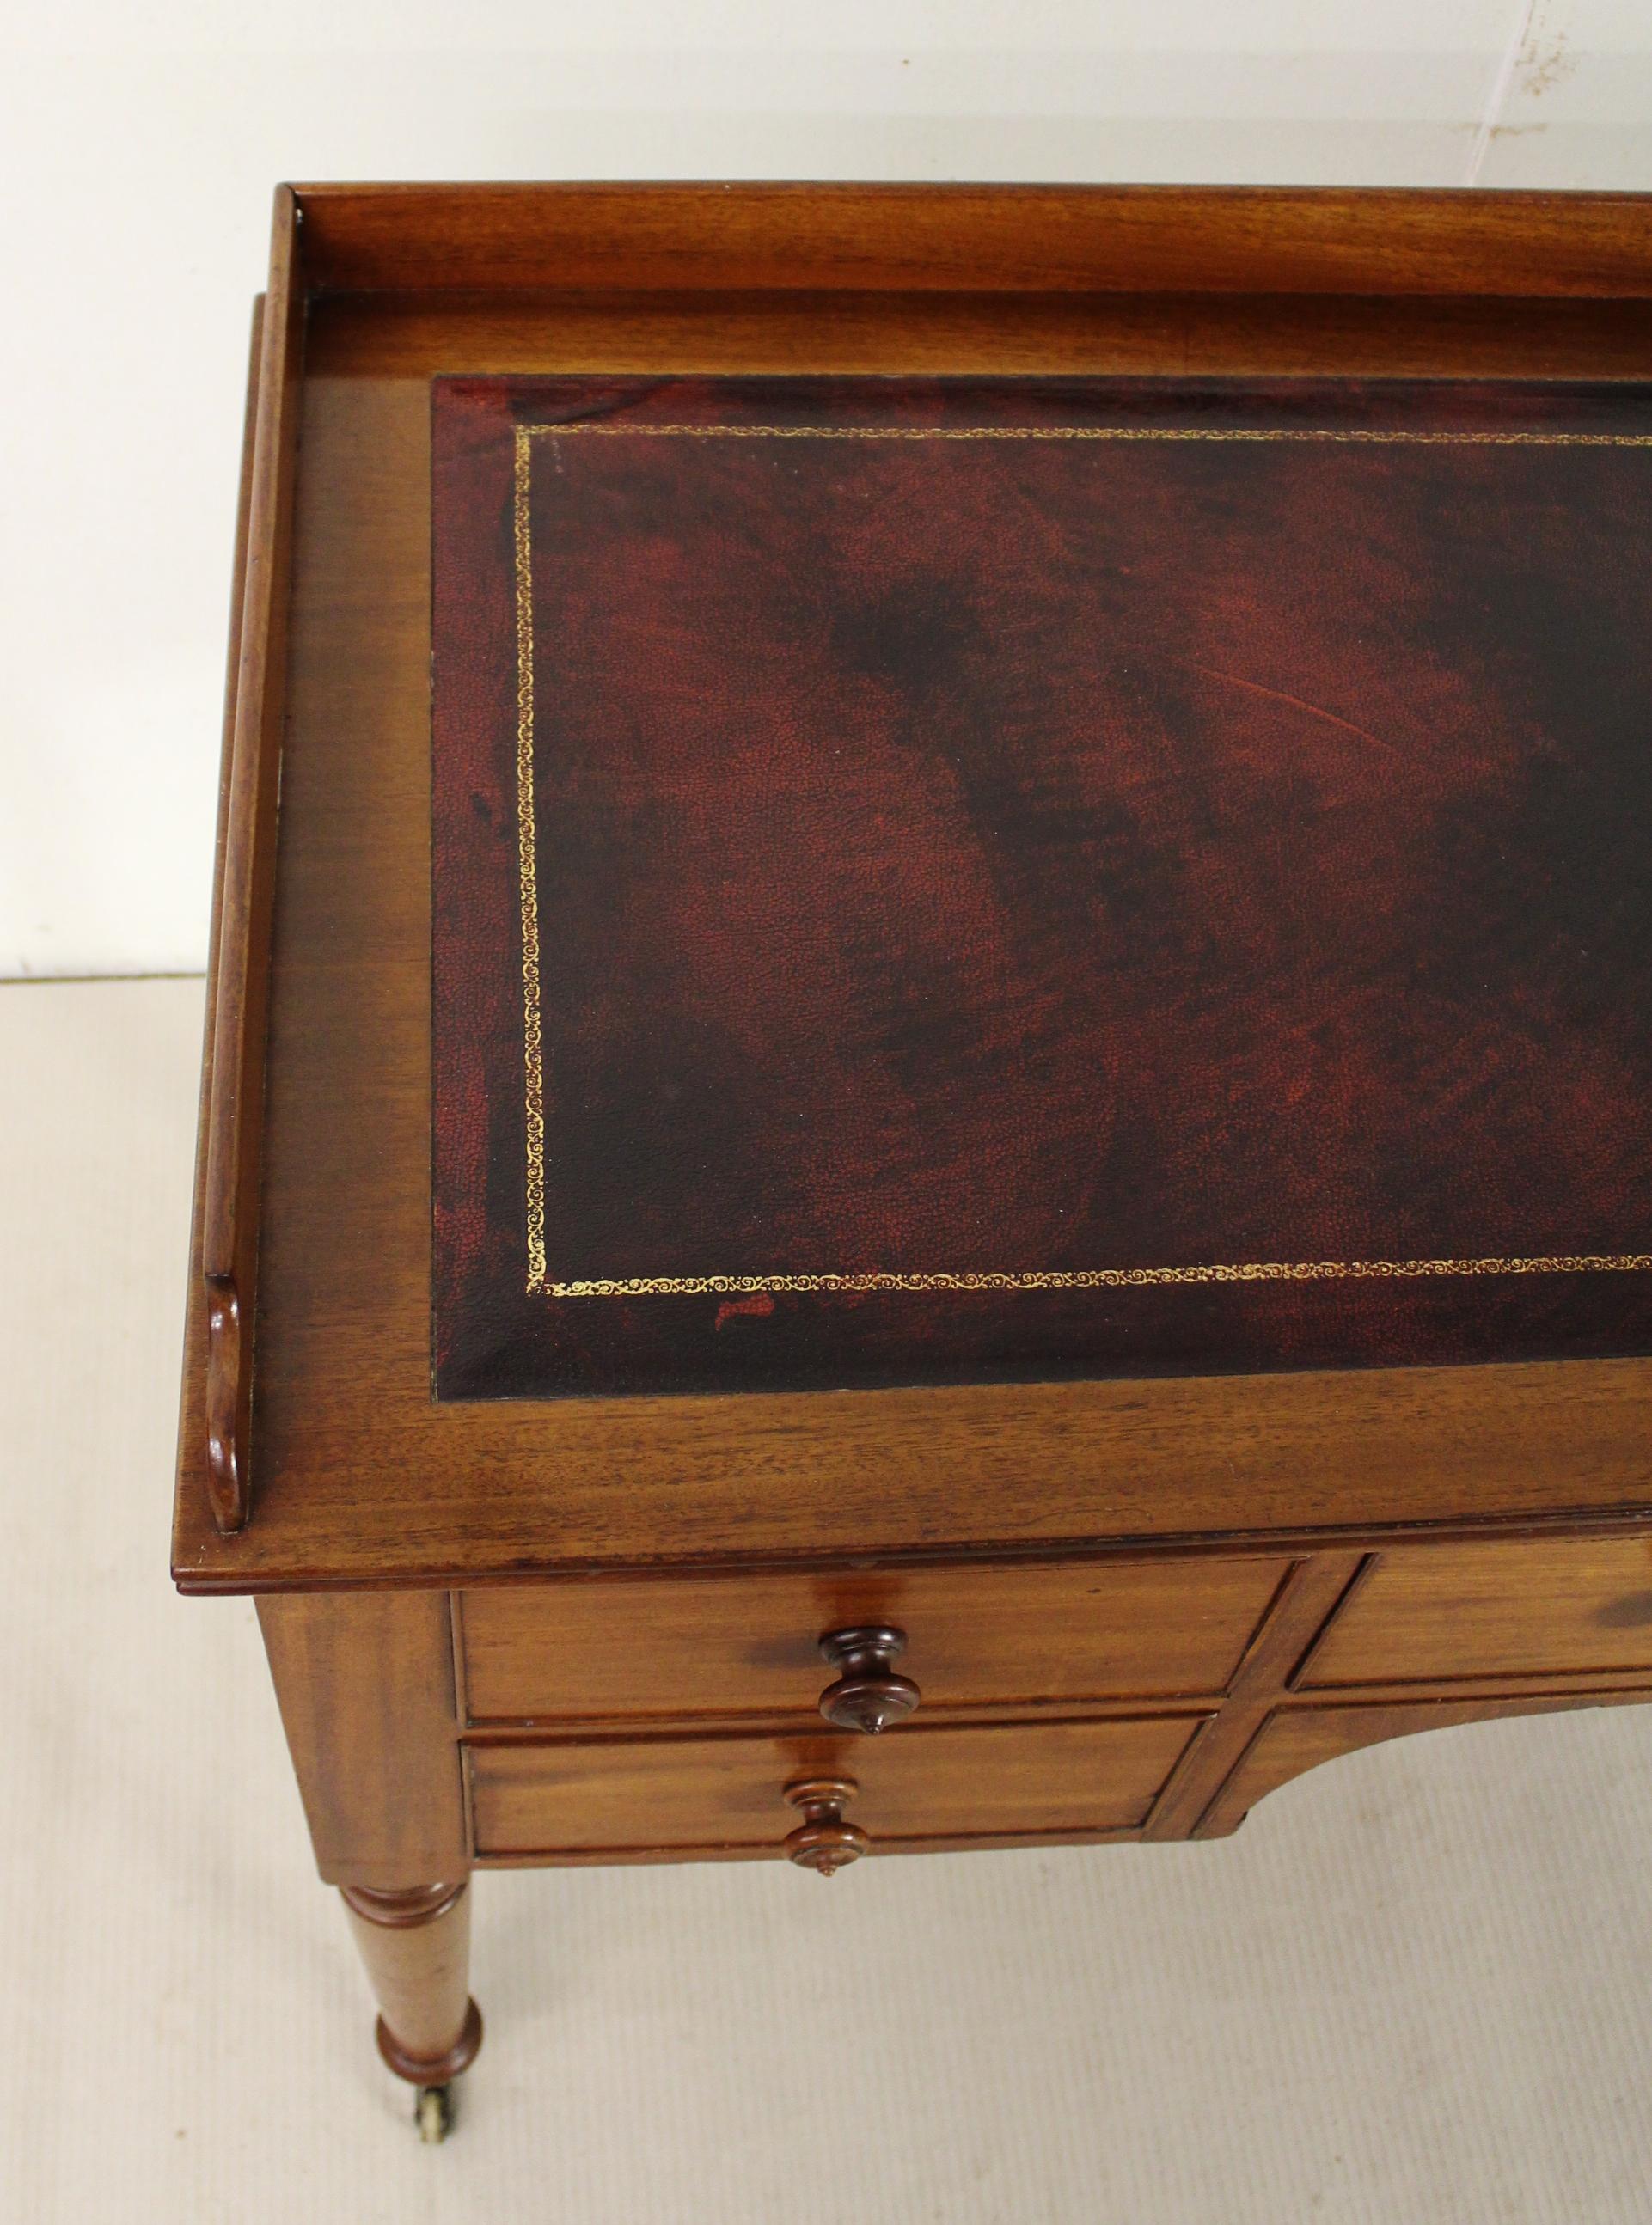 A very good mid-Victorian period mahogany writing table. With a galleried up-stand to the top and fitted with a sumptuous red leather writing surface. There is an arrangement of one long central drawer flanked by a pair of shorter end drawers.